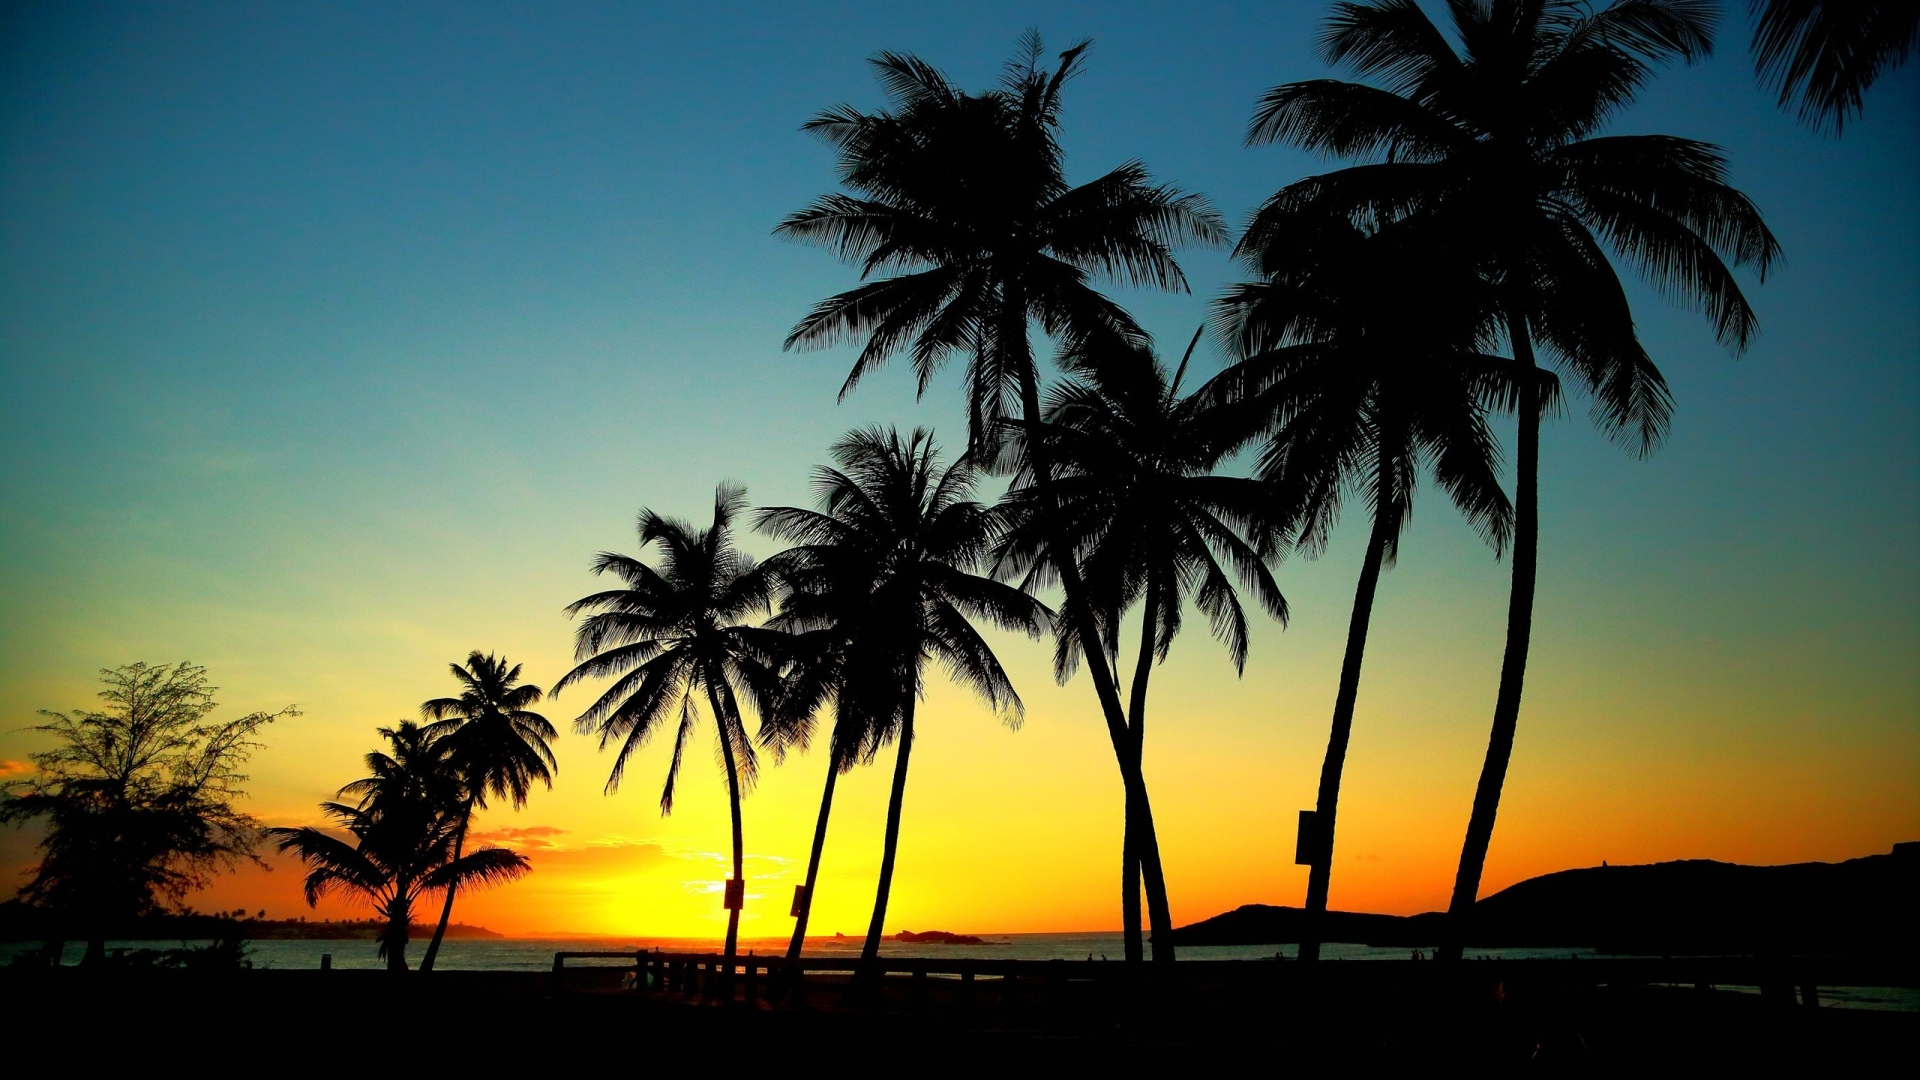 Palm Trees in Sunset for 1920 x 1080 HDTV 1080p resolution